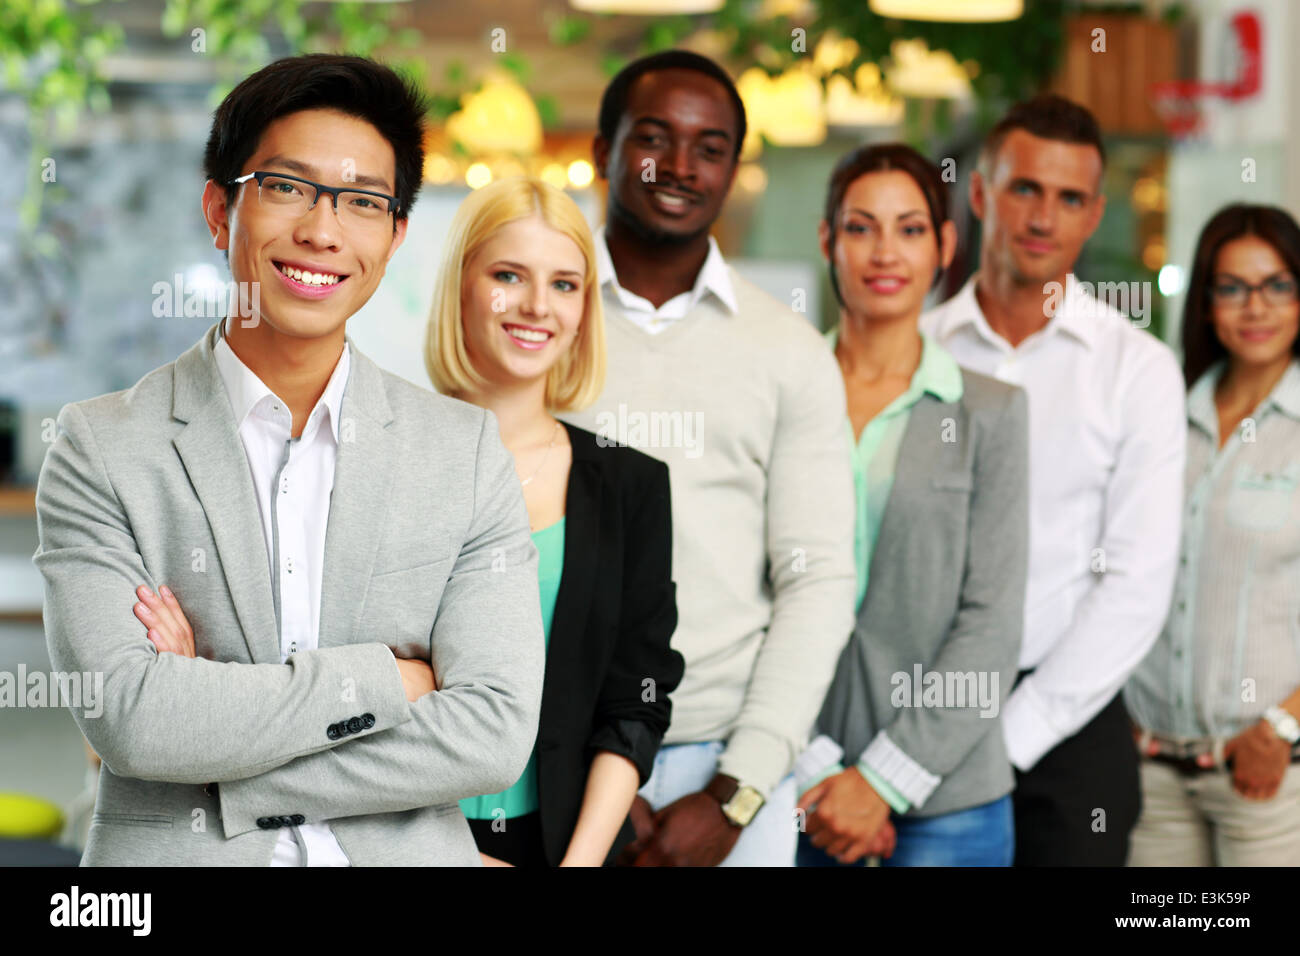 Portrait of a smiling group business people Stock Photo